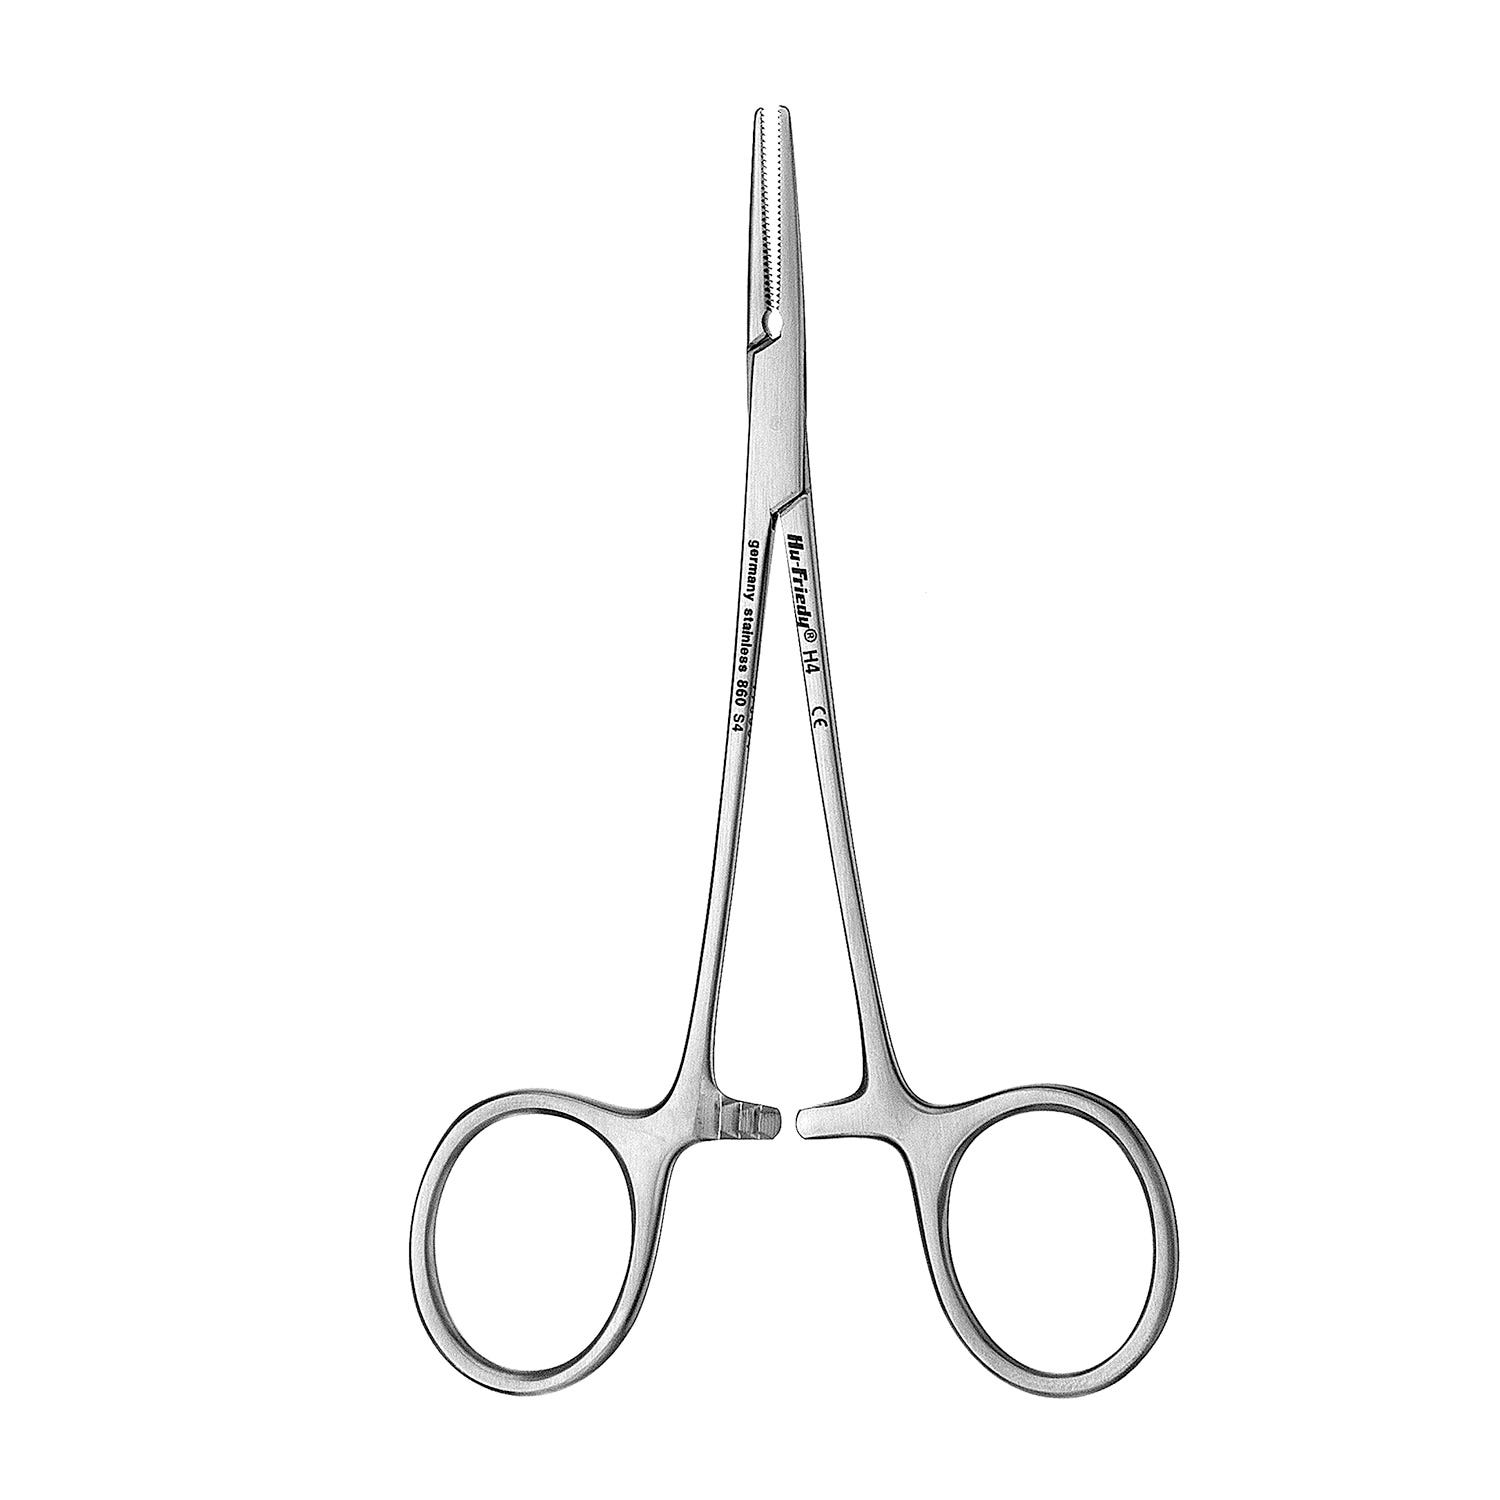 Forcep Mosquito Halsted #4 4 3/4" 12cm Straight